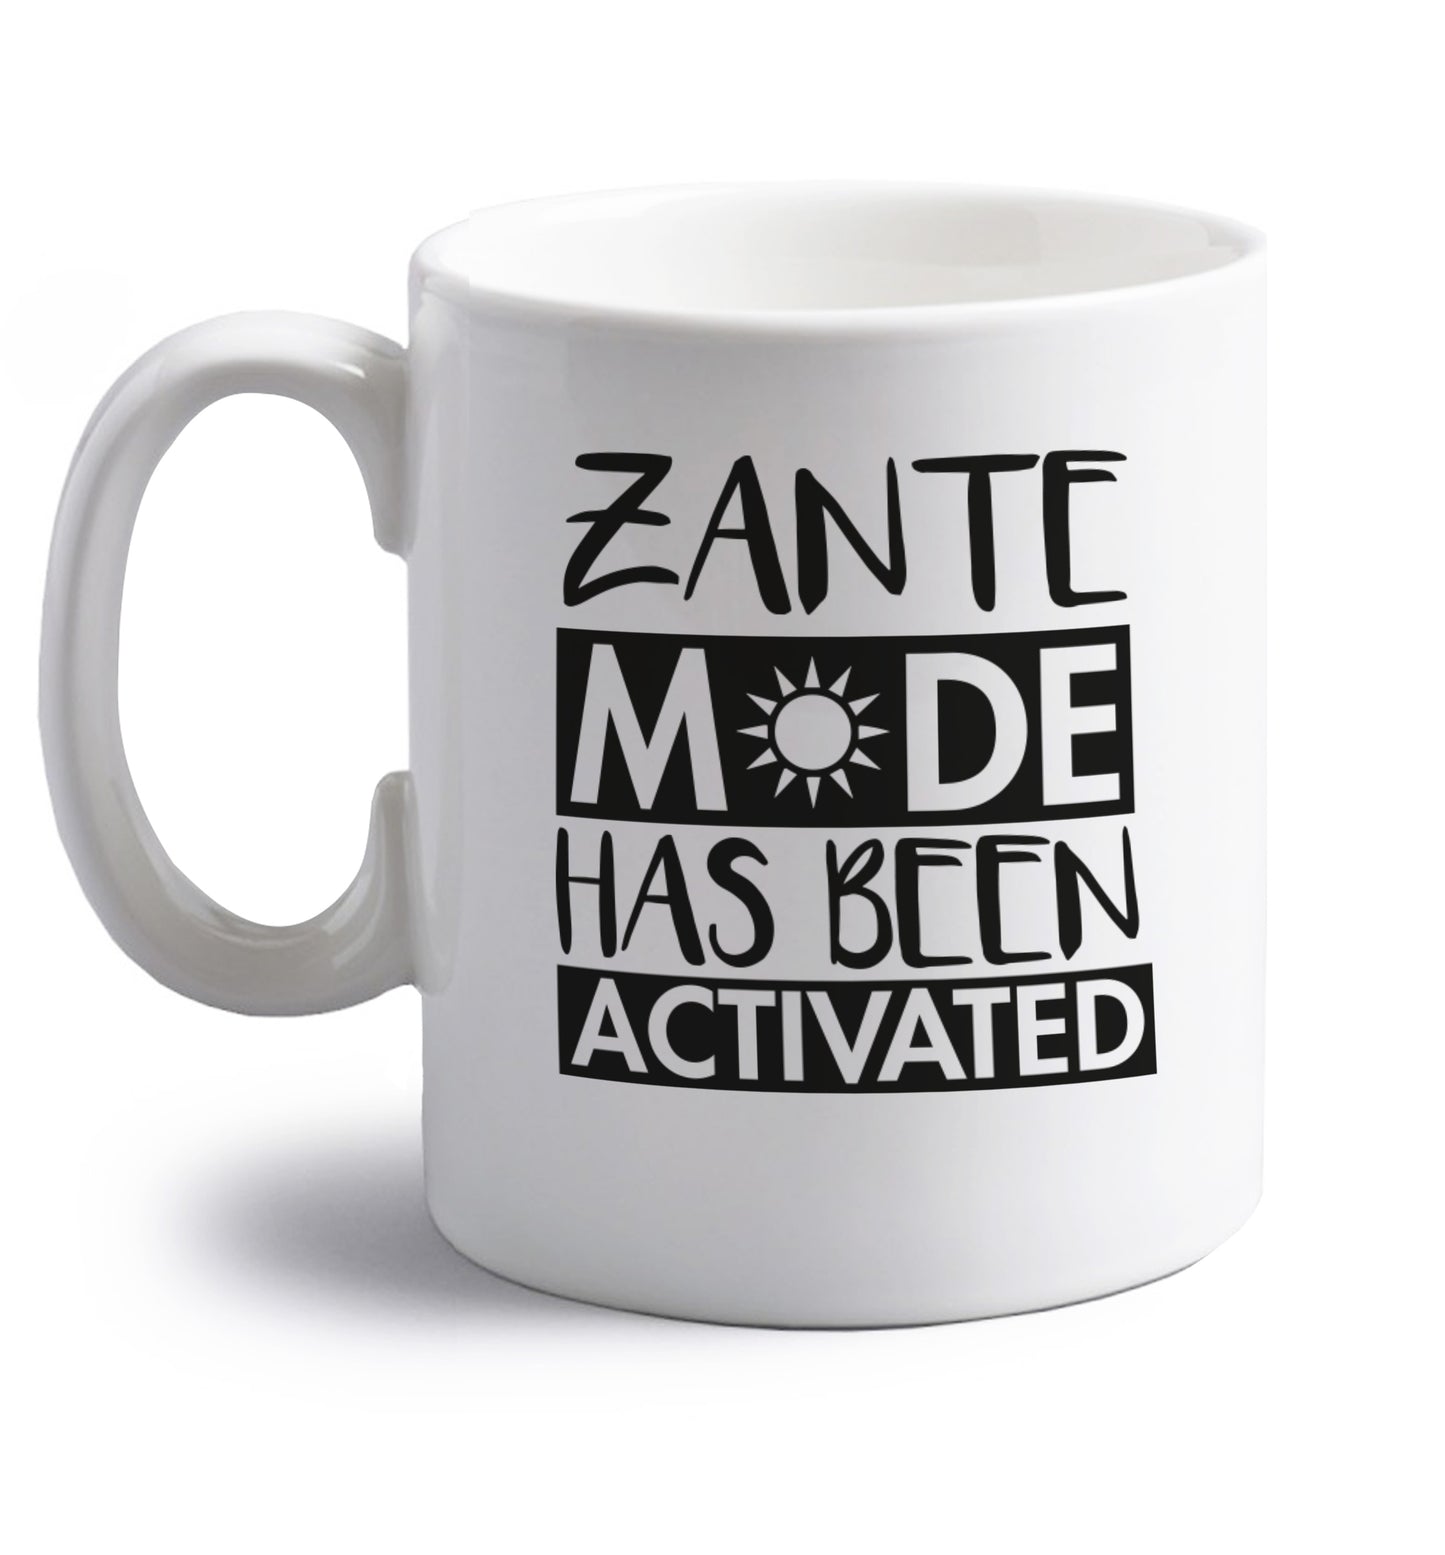 Zante mode has been activated right handed white ceramic mug 